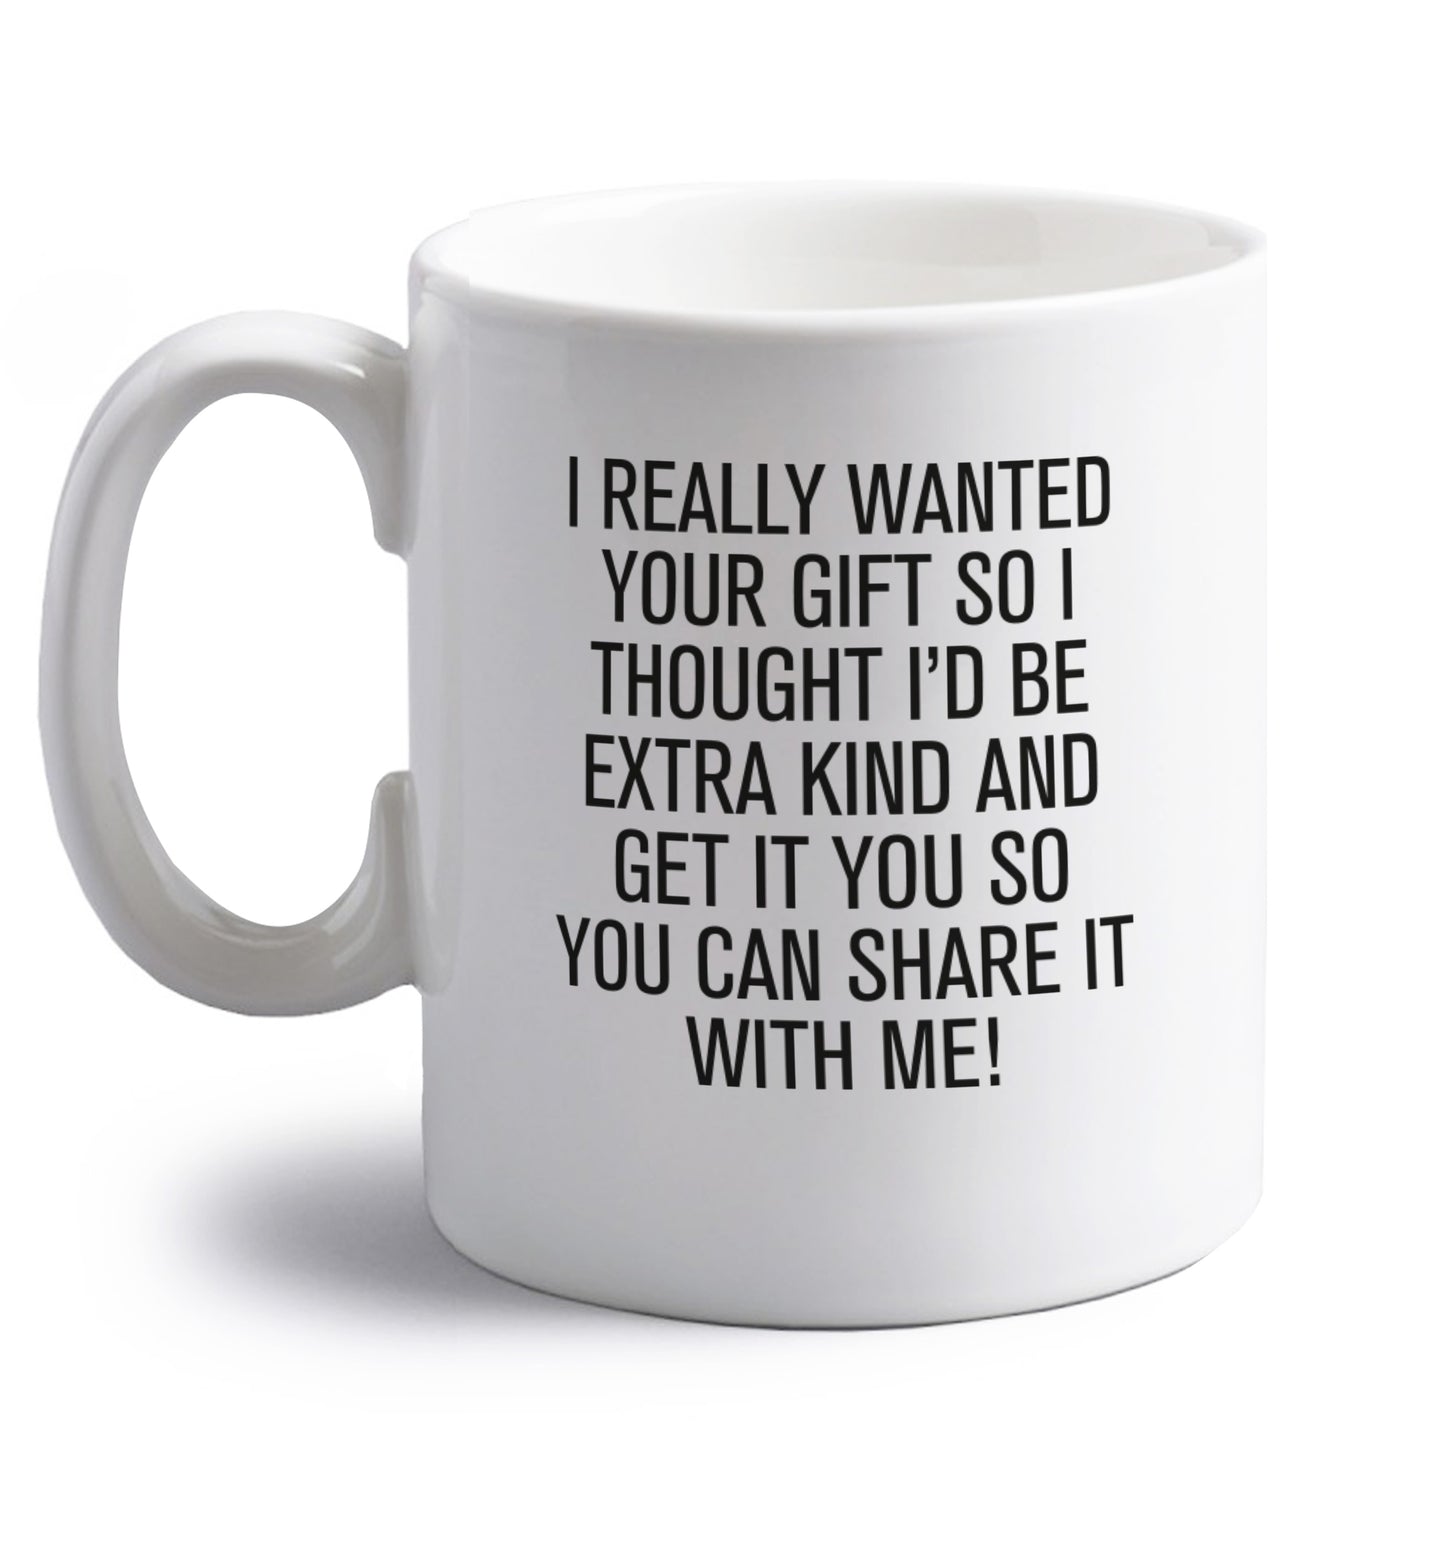 I really wanted your gift right handed white ceramic mug 